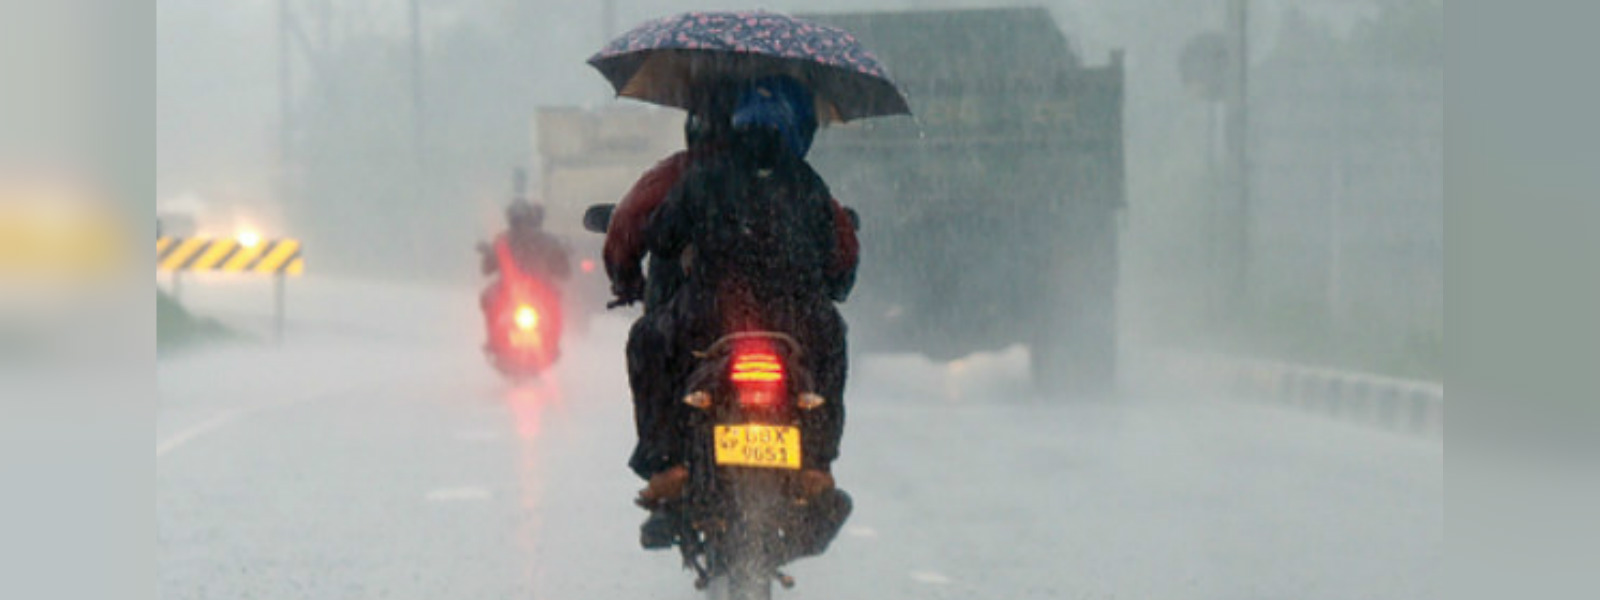 Expect showers and strong winds - Met. Department